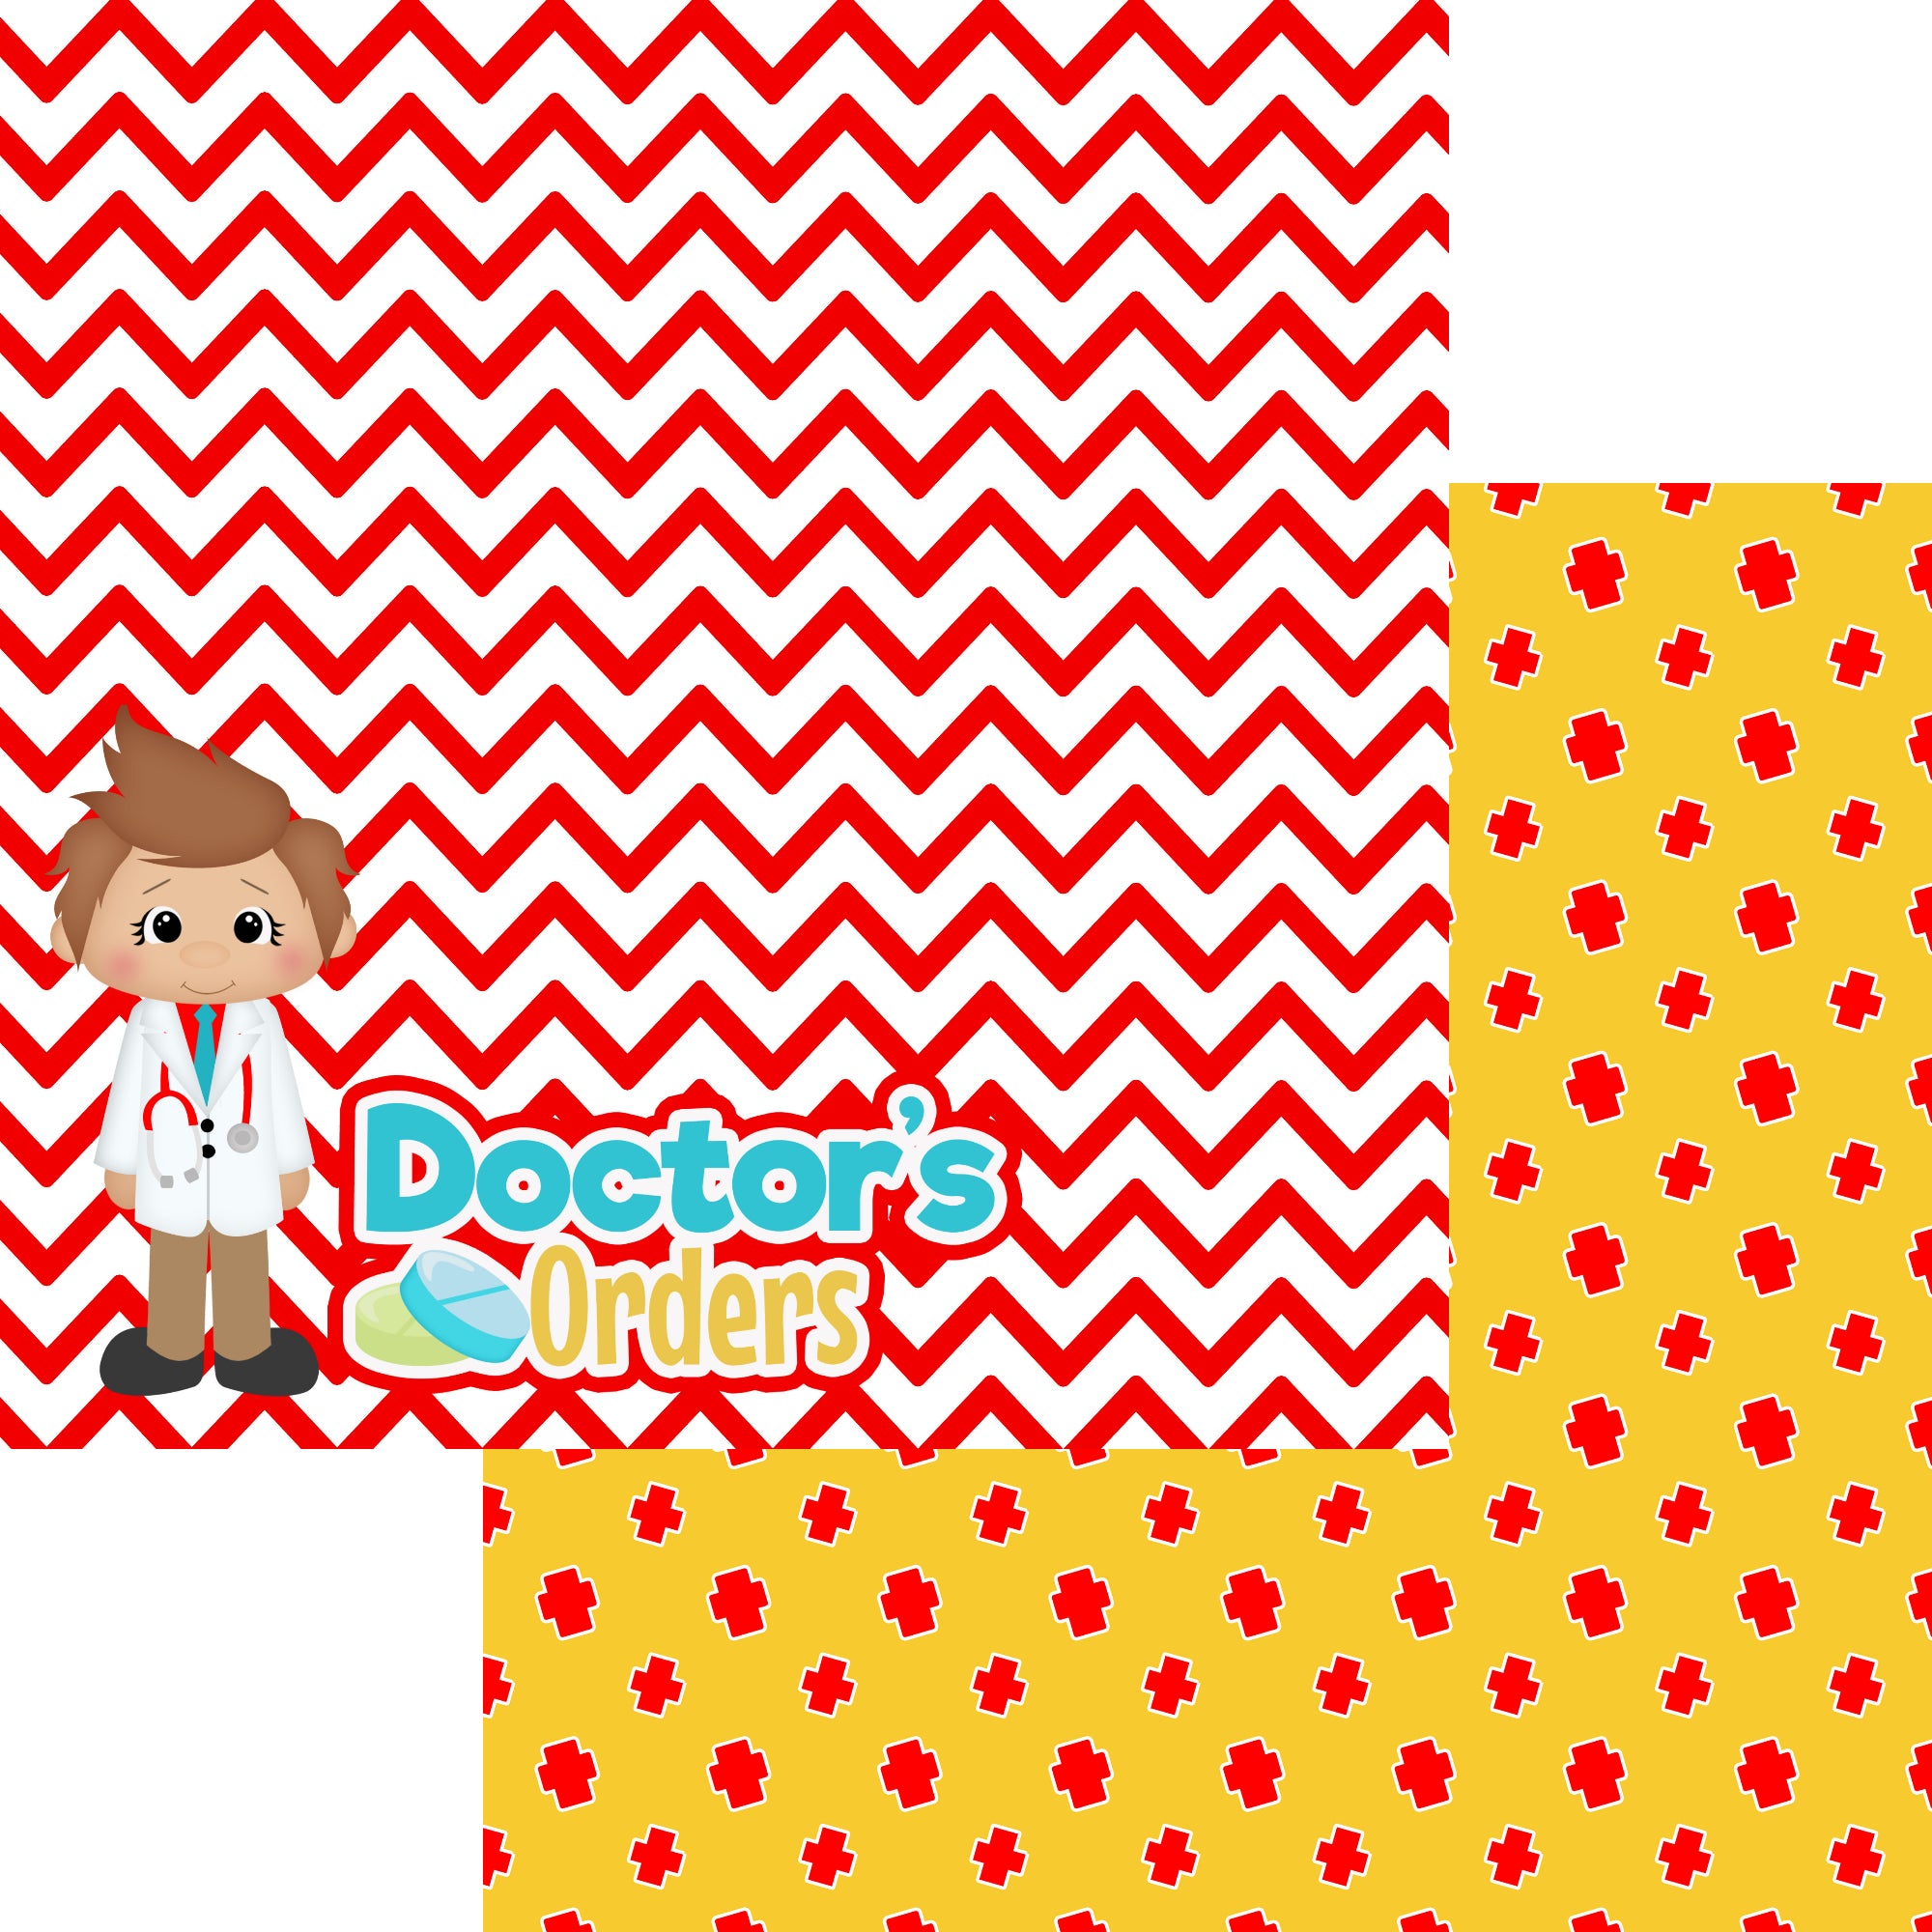 Doctor's Orders 12 x 12 Scrapbook Paper & Embellishment Kit by SSC Designs